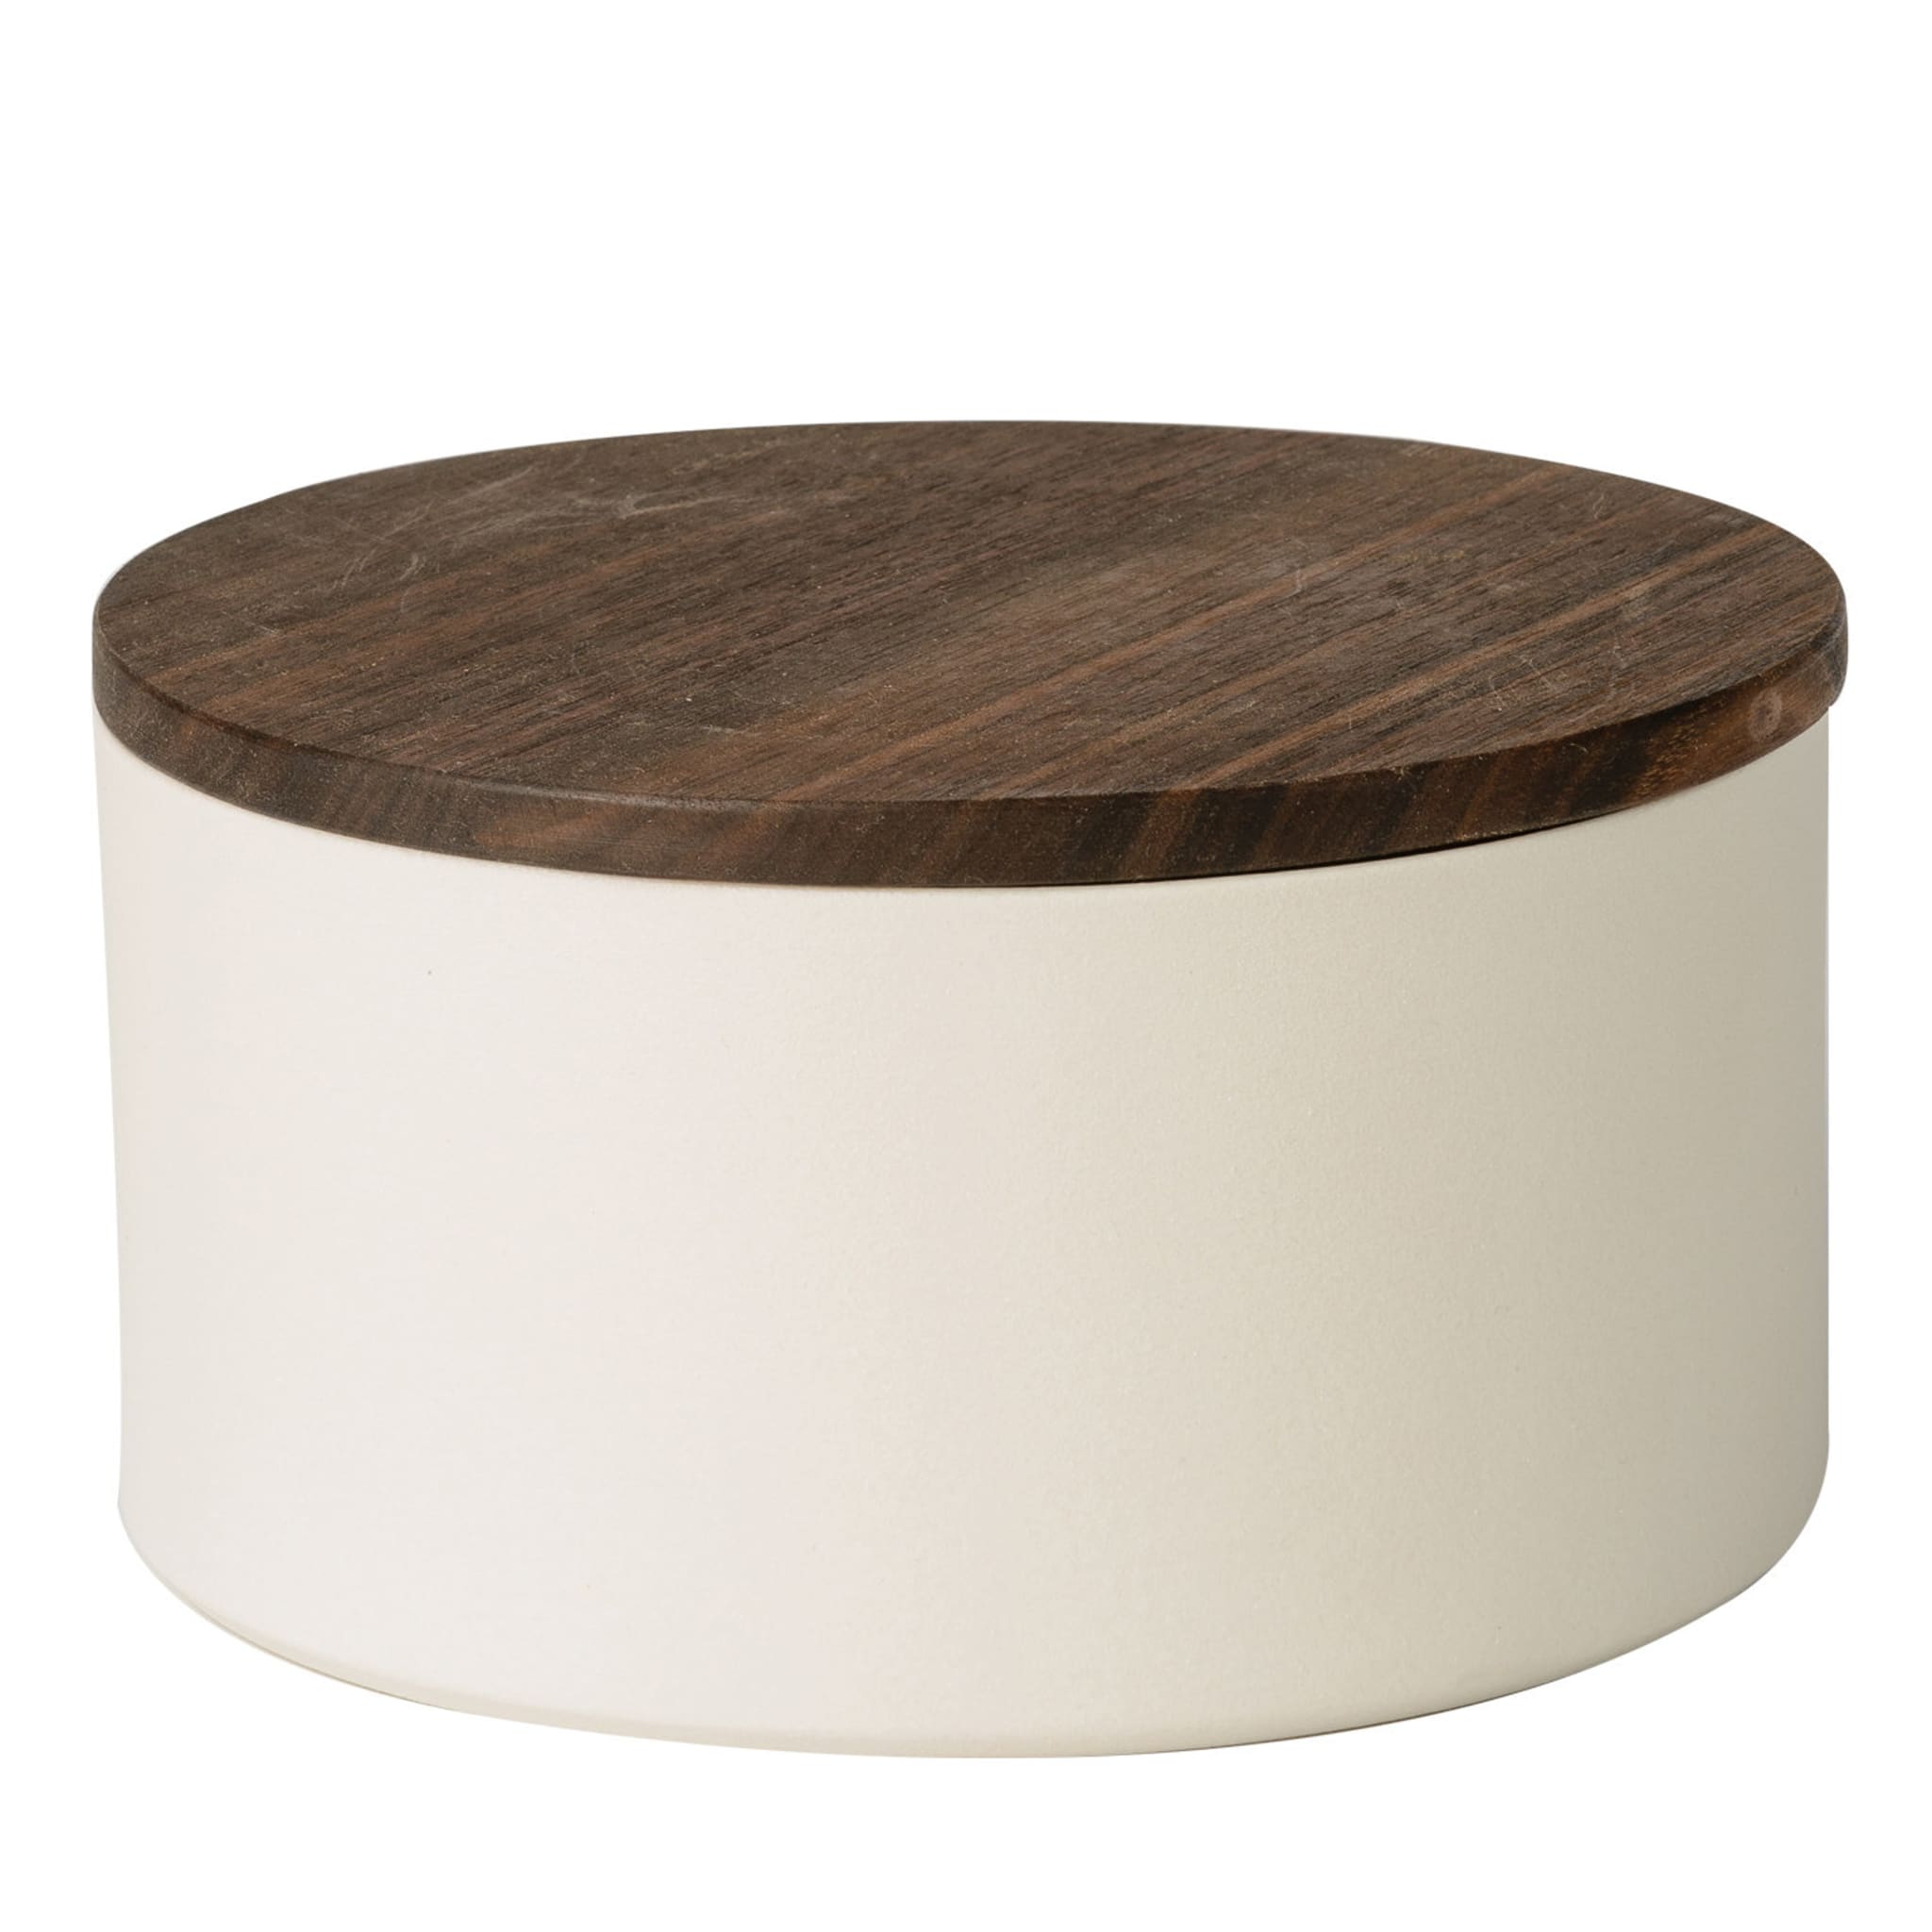 Large Round Ceramic Container with Wooden Lid - Main view